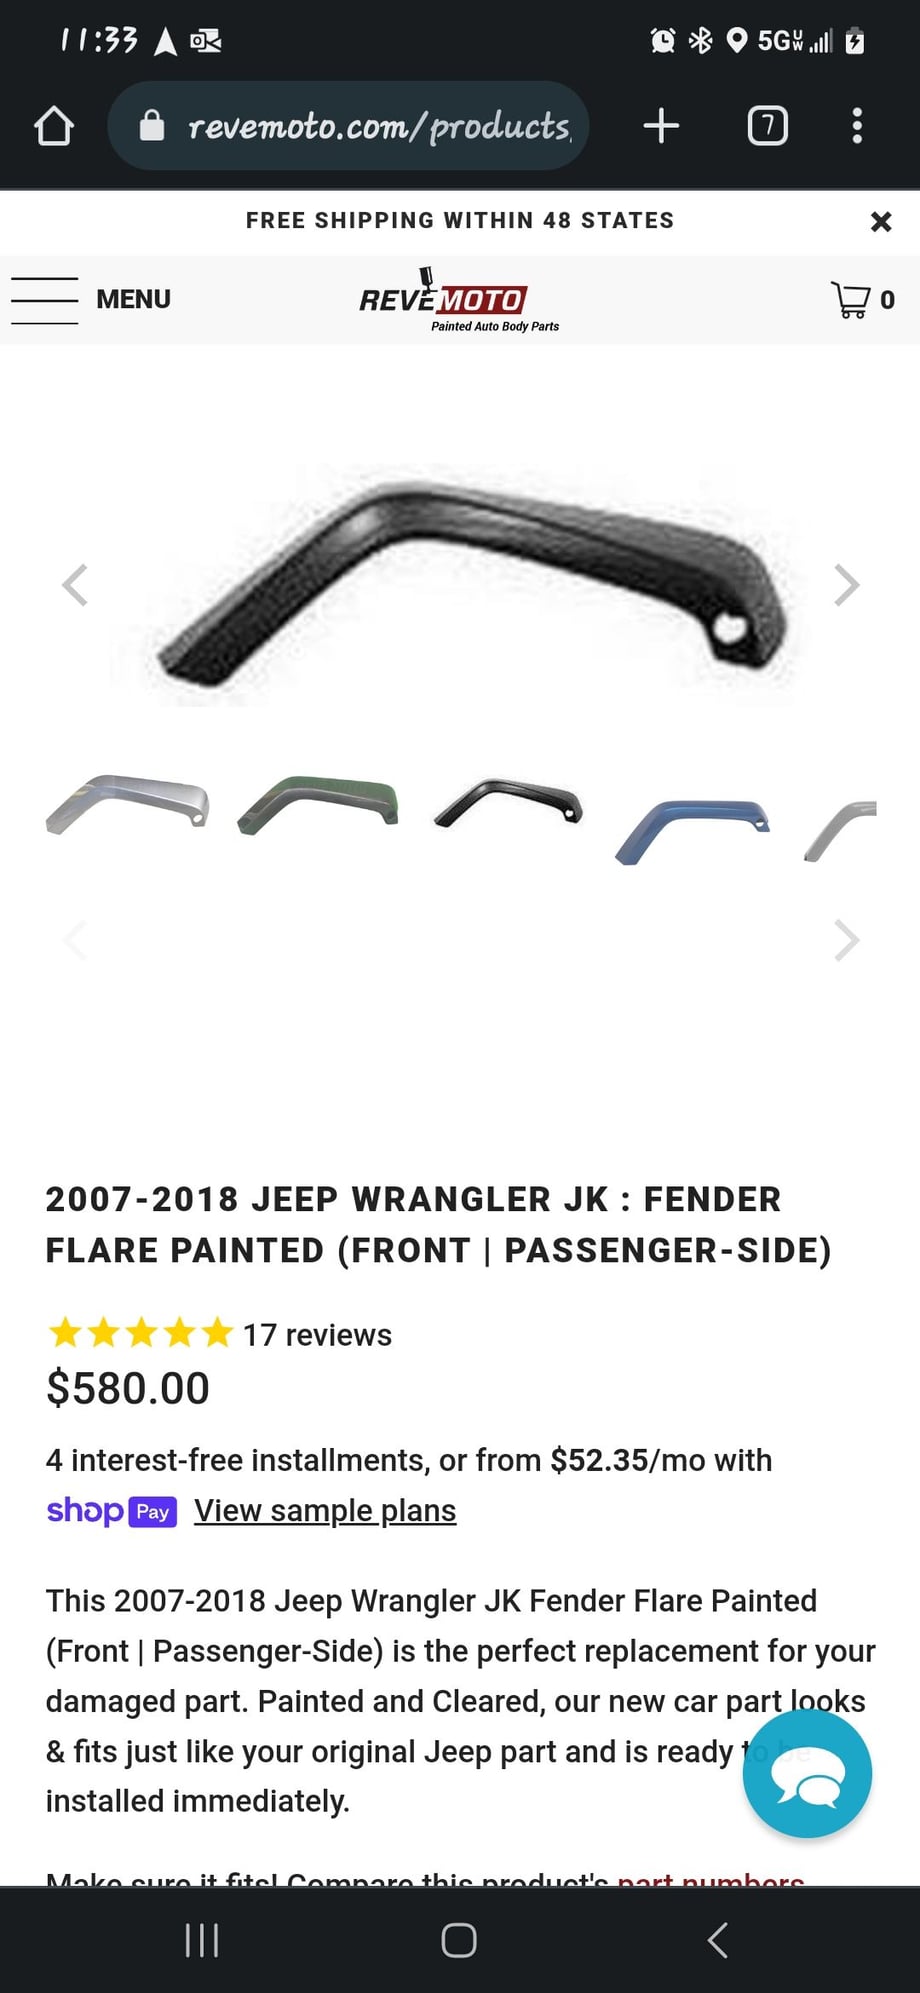 Exterior Body Parts - Oem factory jeep wrangler fenders fender flares painted black - Used - 2000 to 2024 Jeep Wrangler - Mackinaw, IL 61755, United States